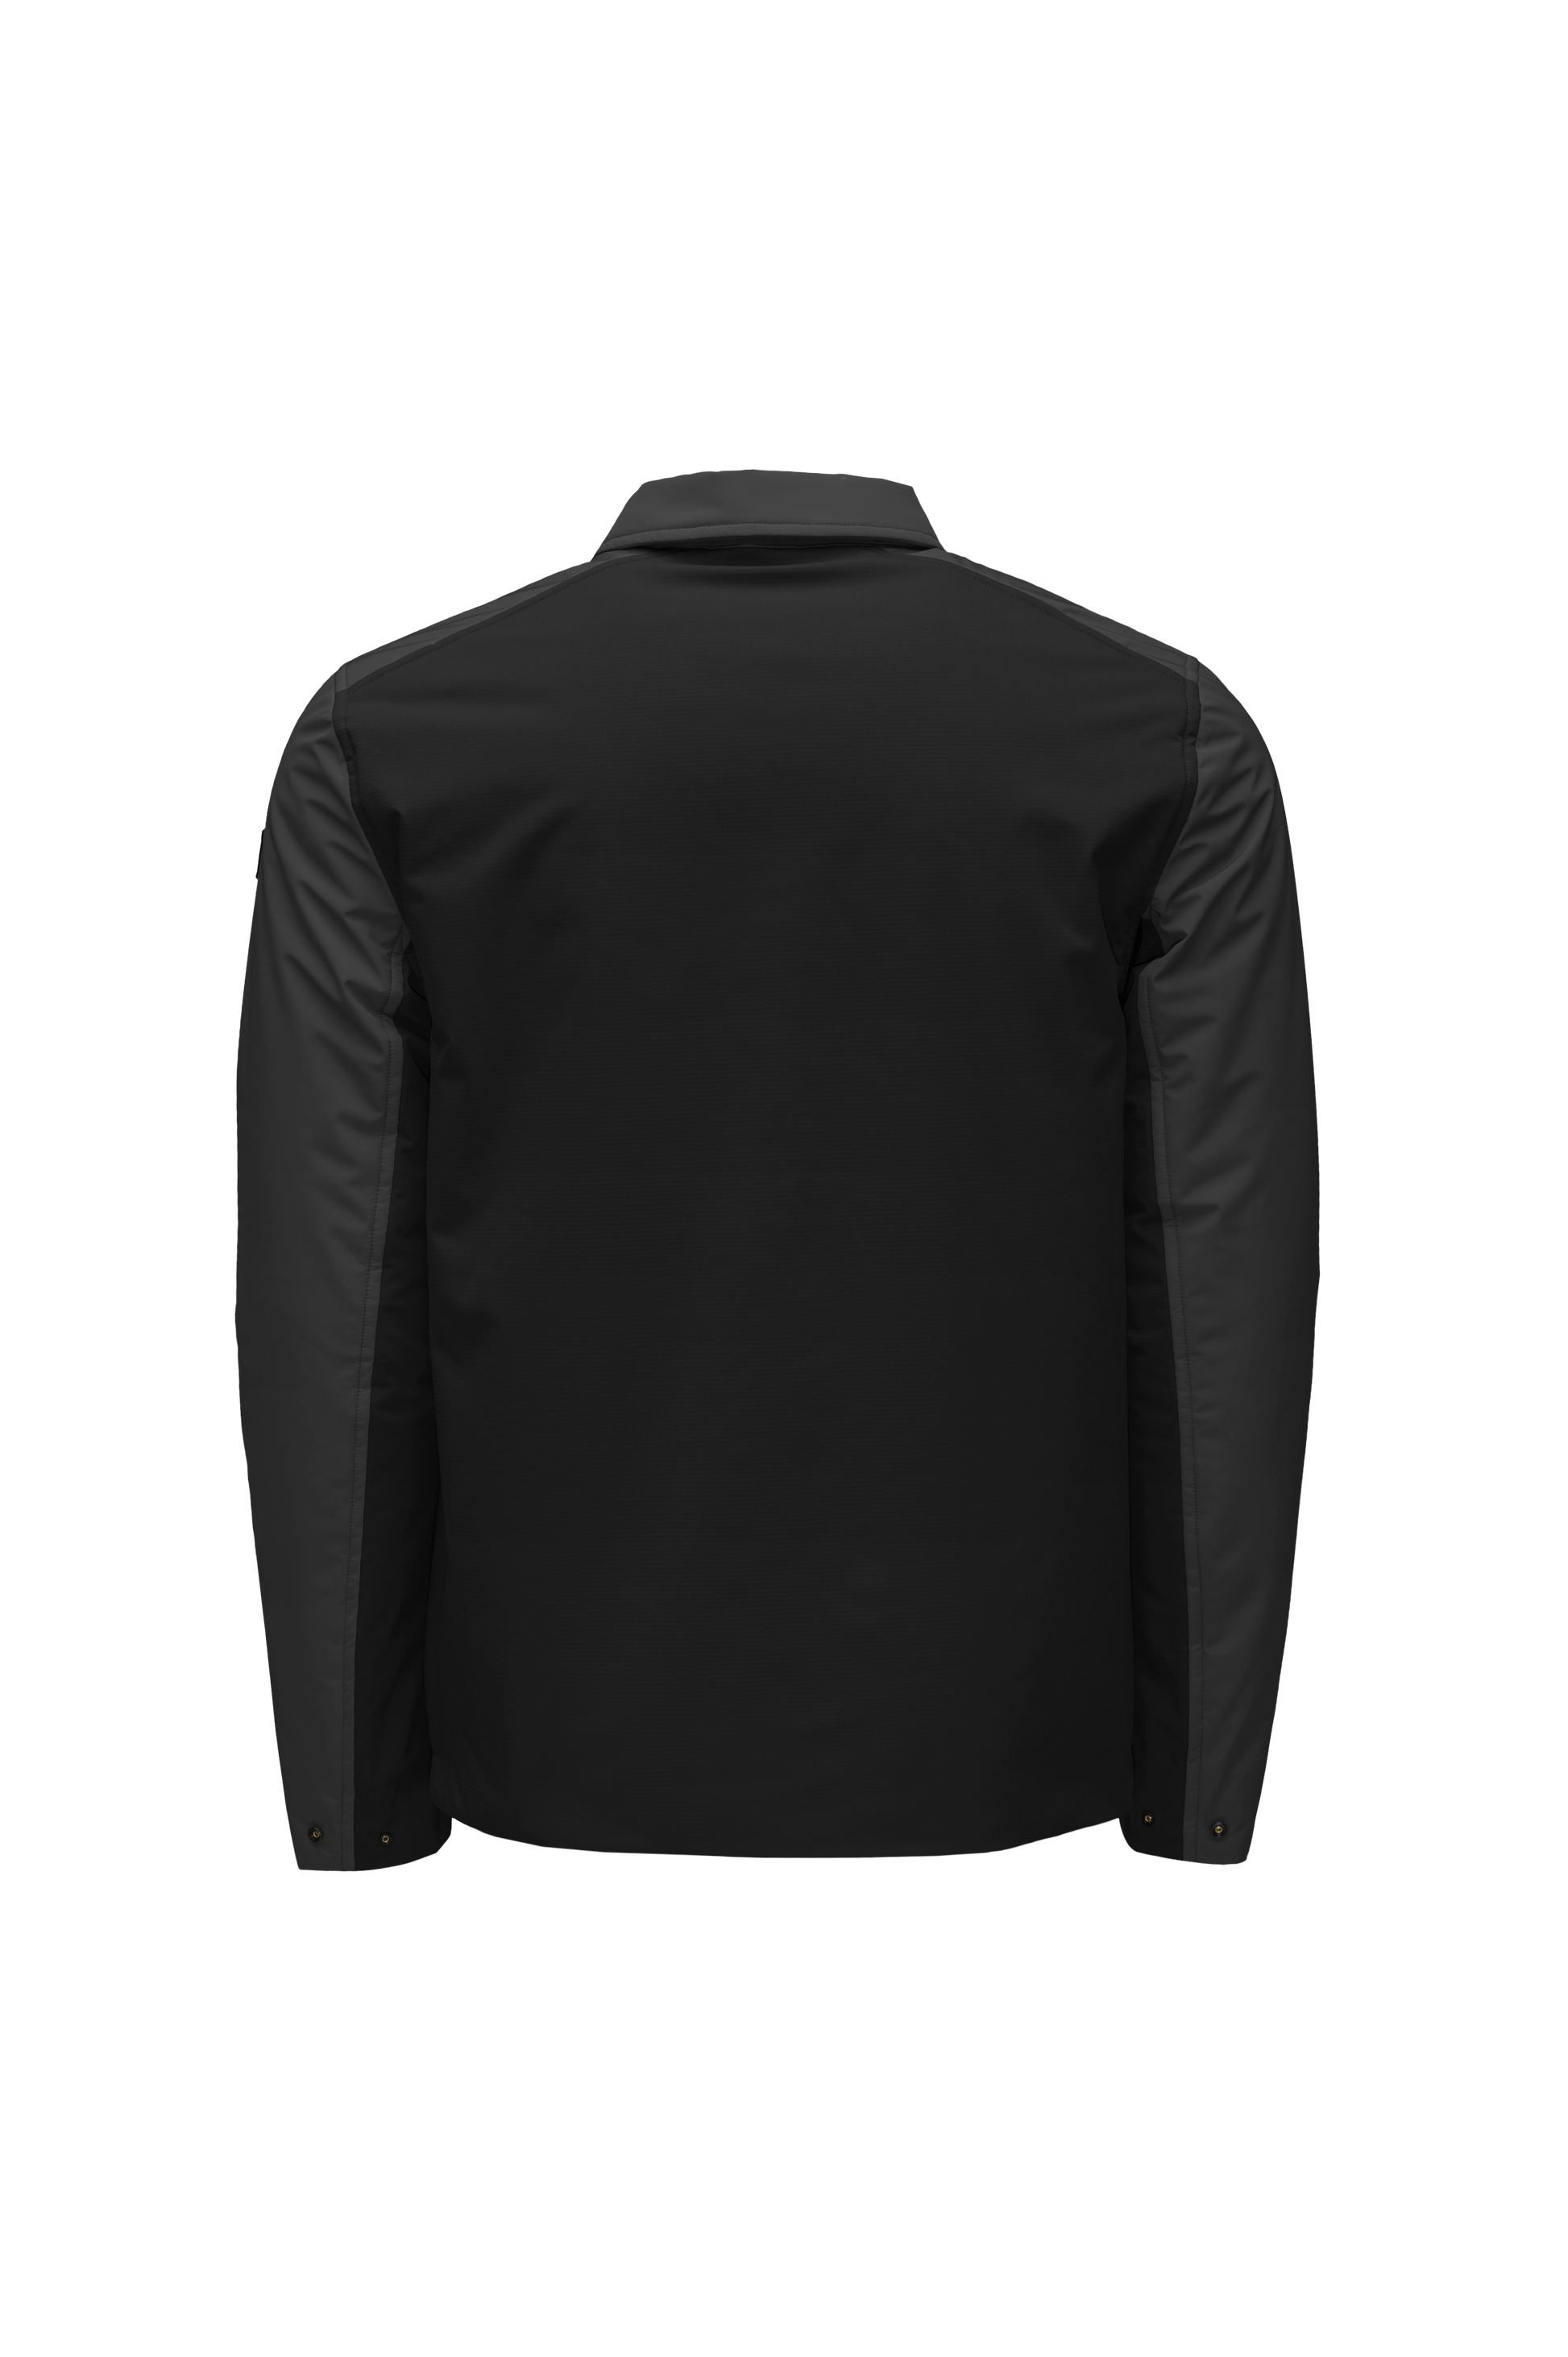 Ander Men's Mid Layer Shirt in hip length, PrimaLoft Gold Insulation Active+, 3-Ply Micro Denier front and 4-Way Durable Stretch Weave back, zipper chest pockets, snap button wind flap, and snap button cuffs, in Black